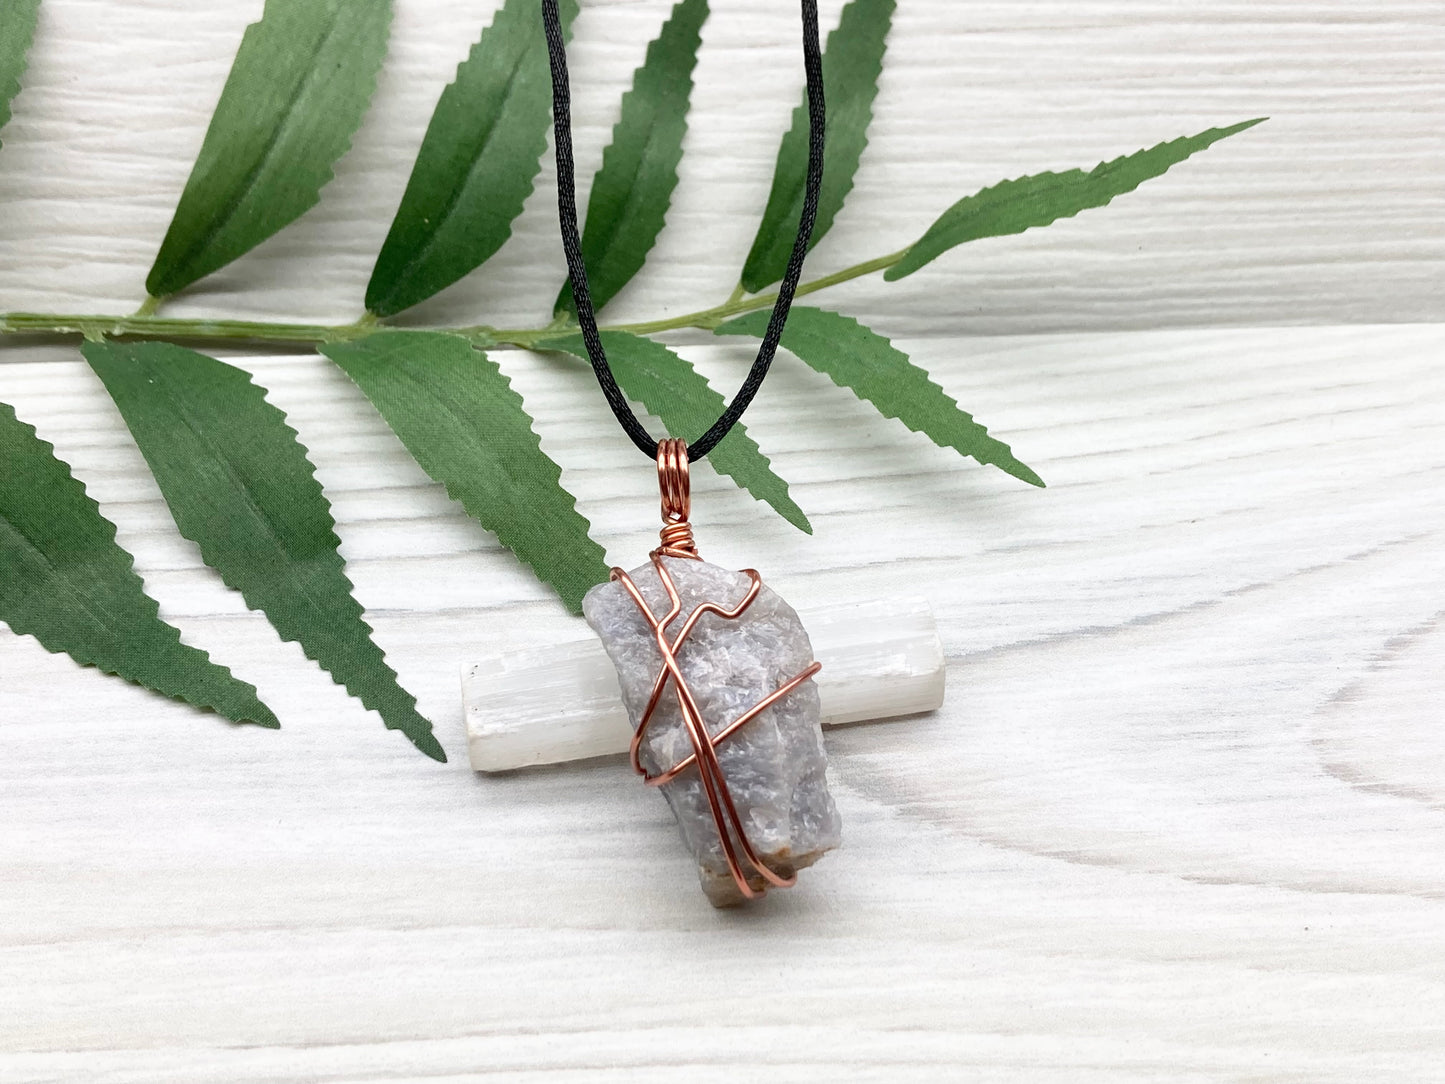 Blue Quartz Crystal Necklace. Light Blue Copper Wire Wrapped Stone. Rough Gemstone On A Black Chain. Throat Chakra Stone. New Age Spiritual Jewelry